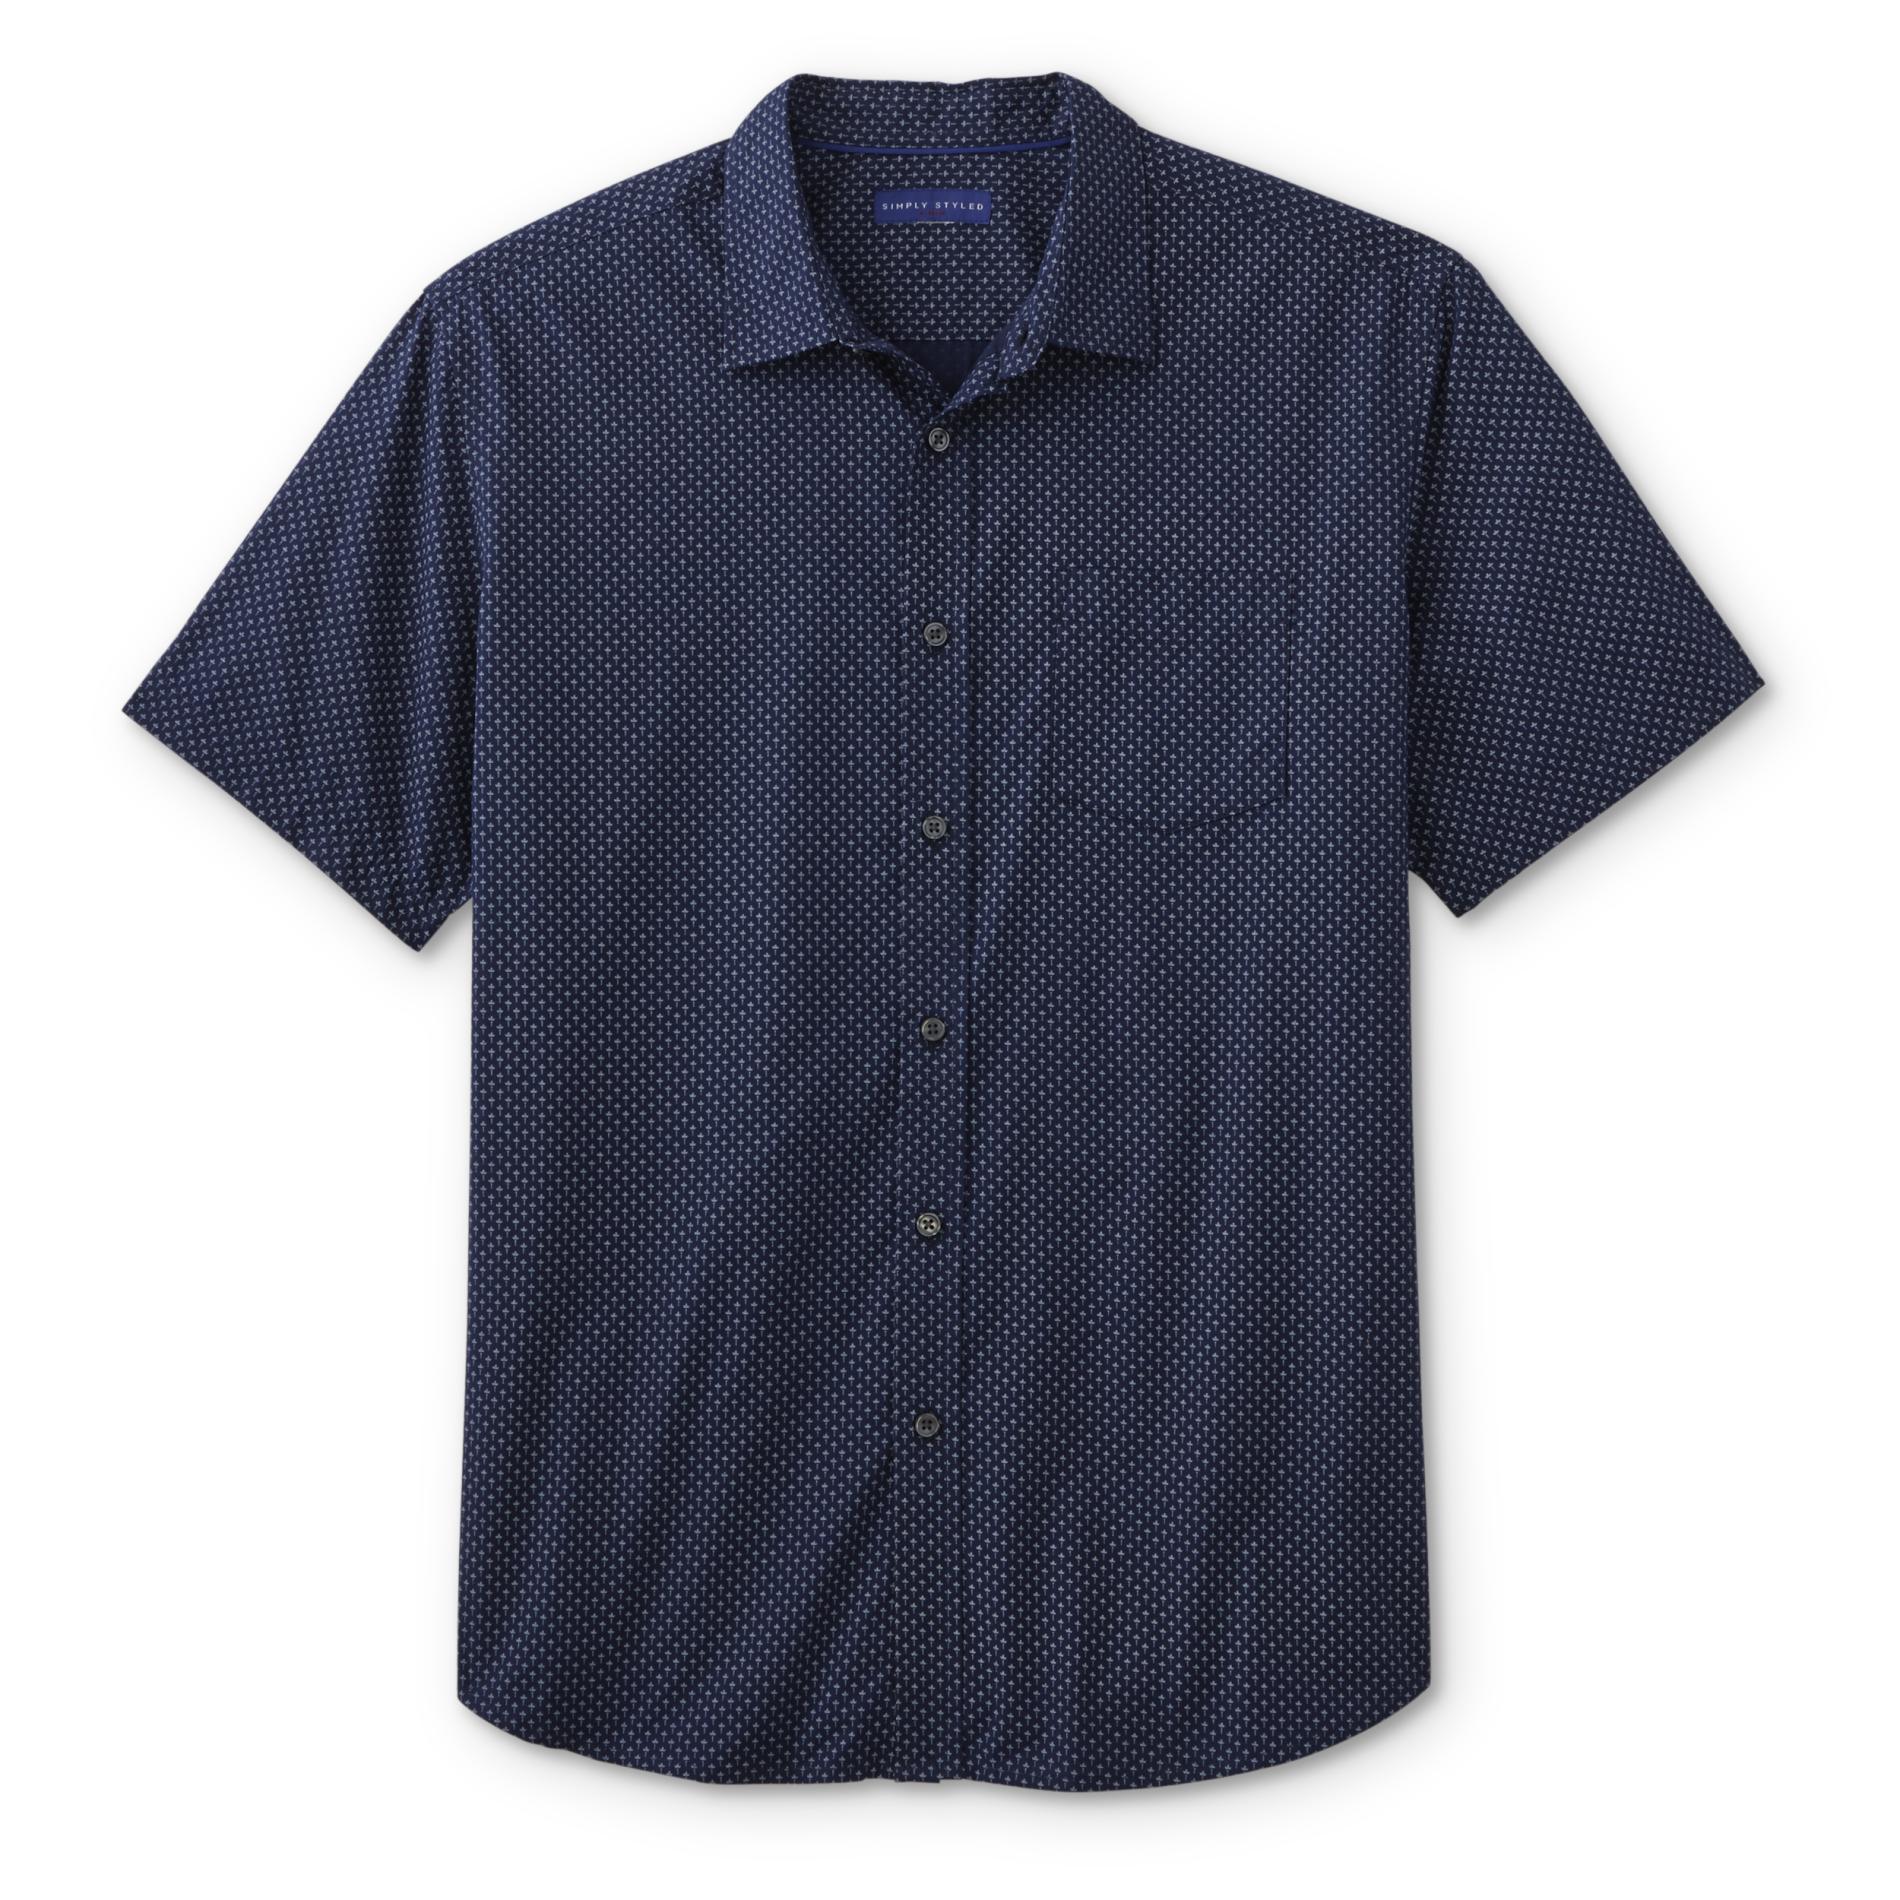 Simply Styled Men's Button-Front Shirt - Ditsy Print